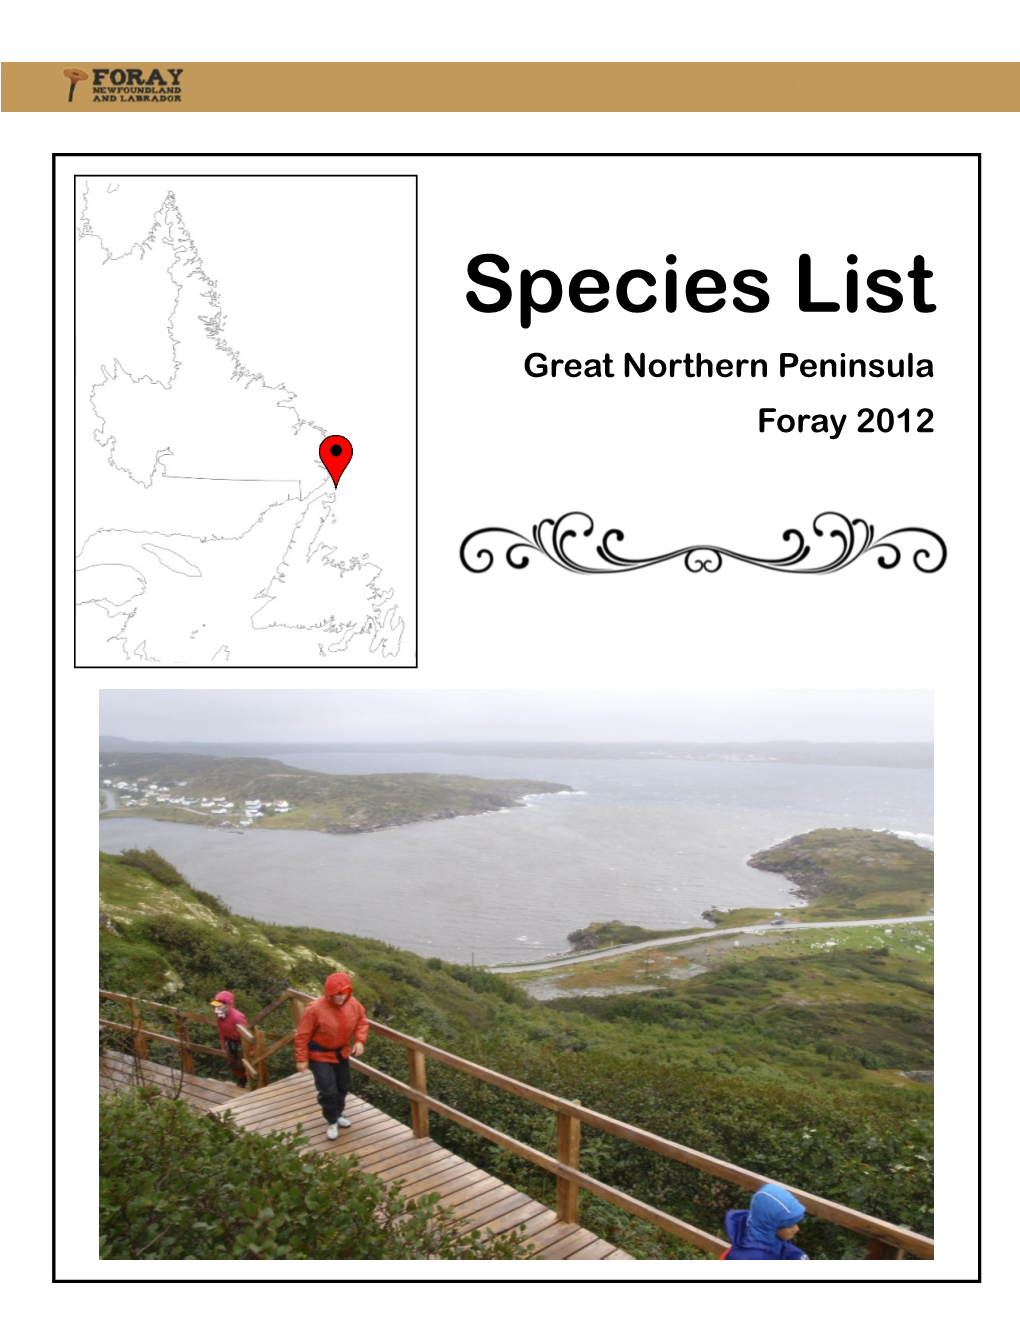 Species List Great Northern Peninsula Foray 2012 Species List, Great Northern Peninsula, 2012